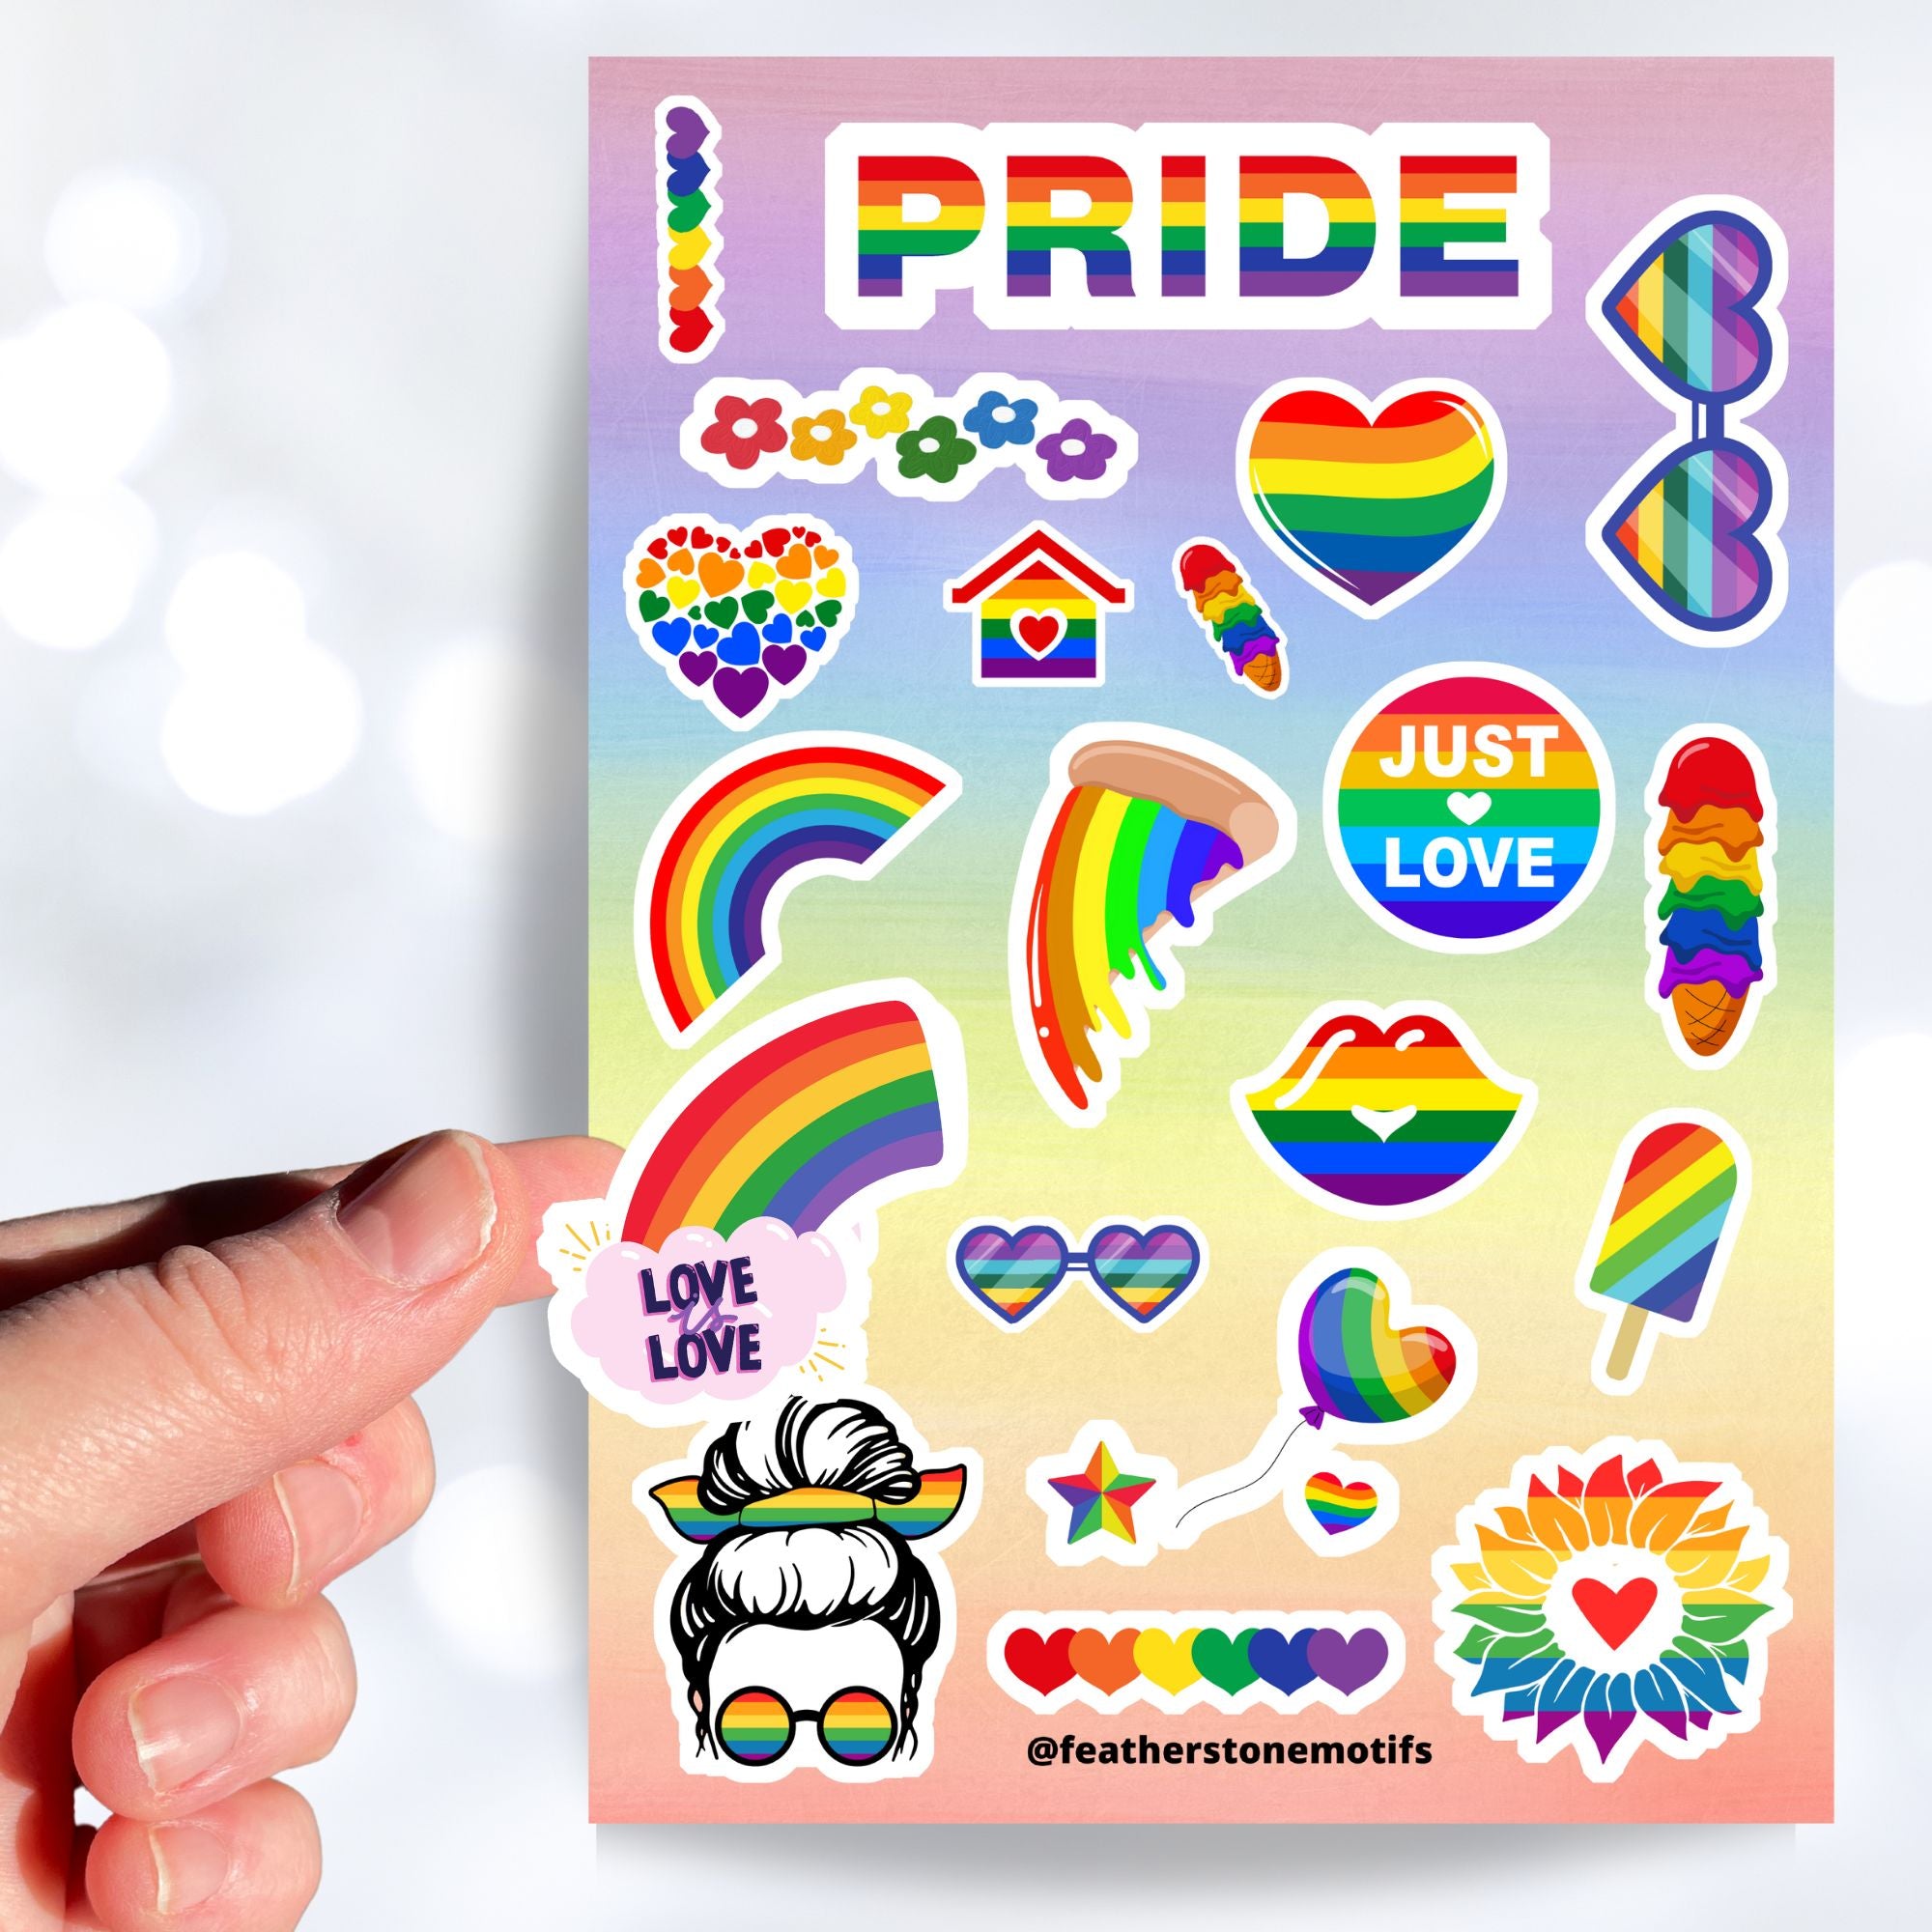 Show your LGBTQ Pride with this sticker sheet! This sticker sheet is filled with rainbow Pride images that are perfect for anywhere you want to show your Pride. This image is of a hand holding a Rainbow Love is Love sticker above the sticker sheet.